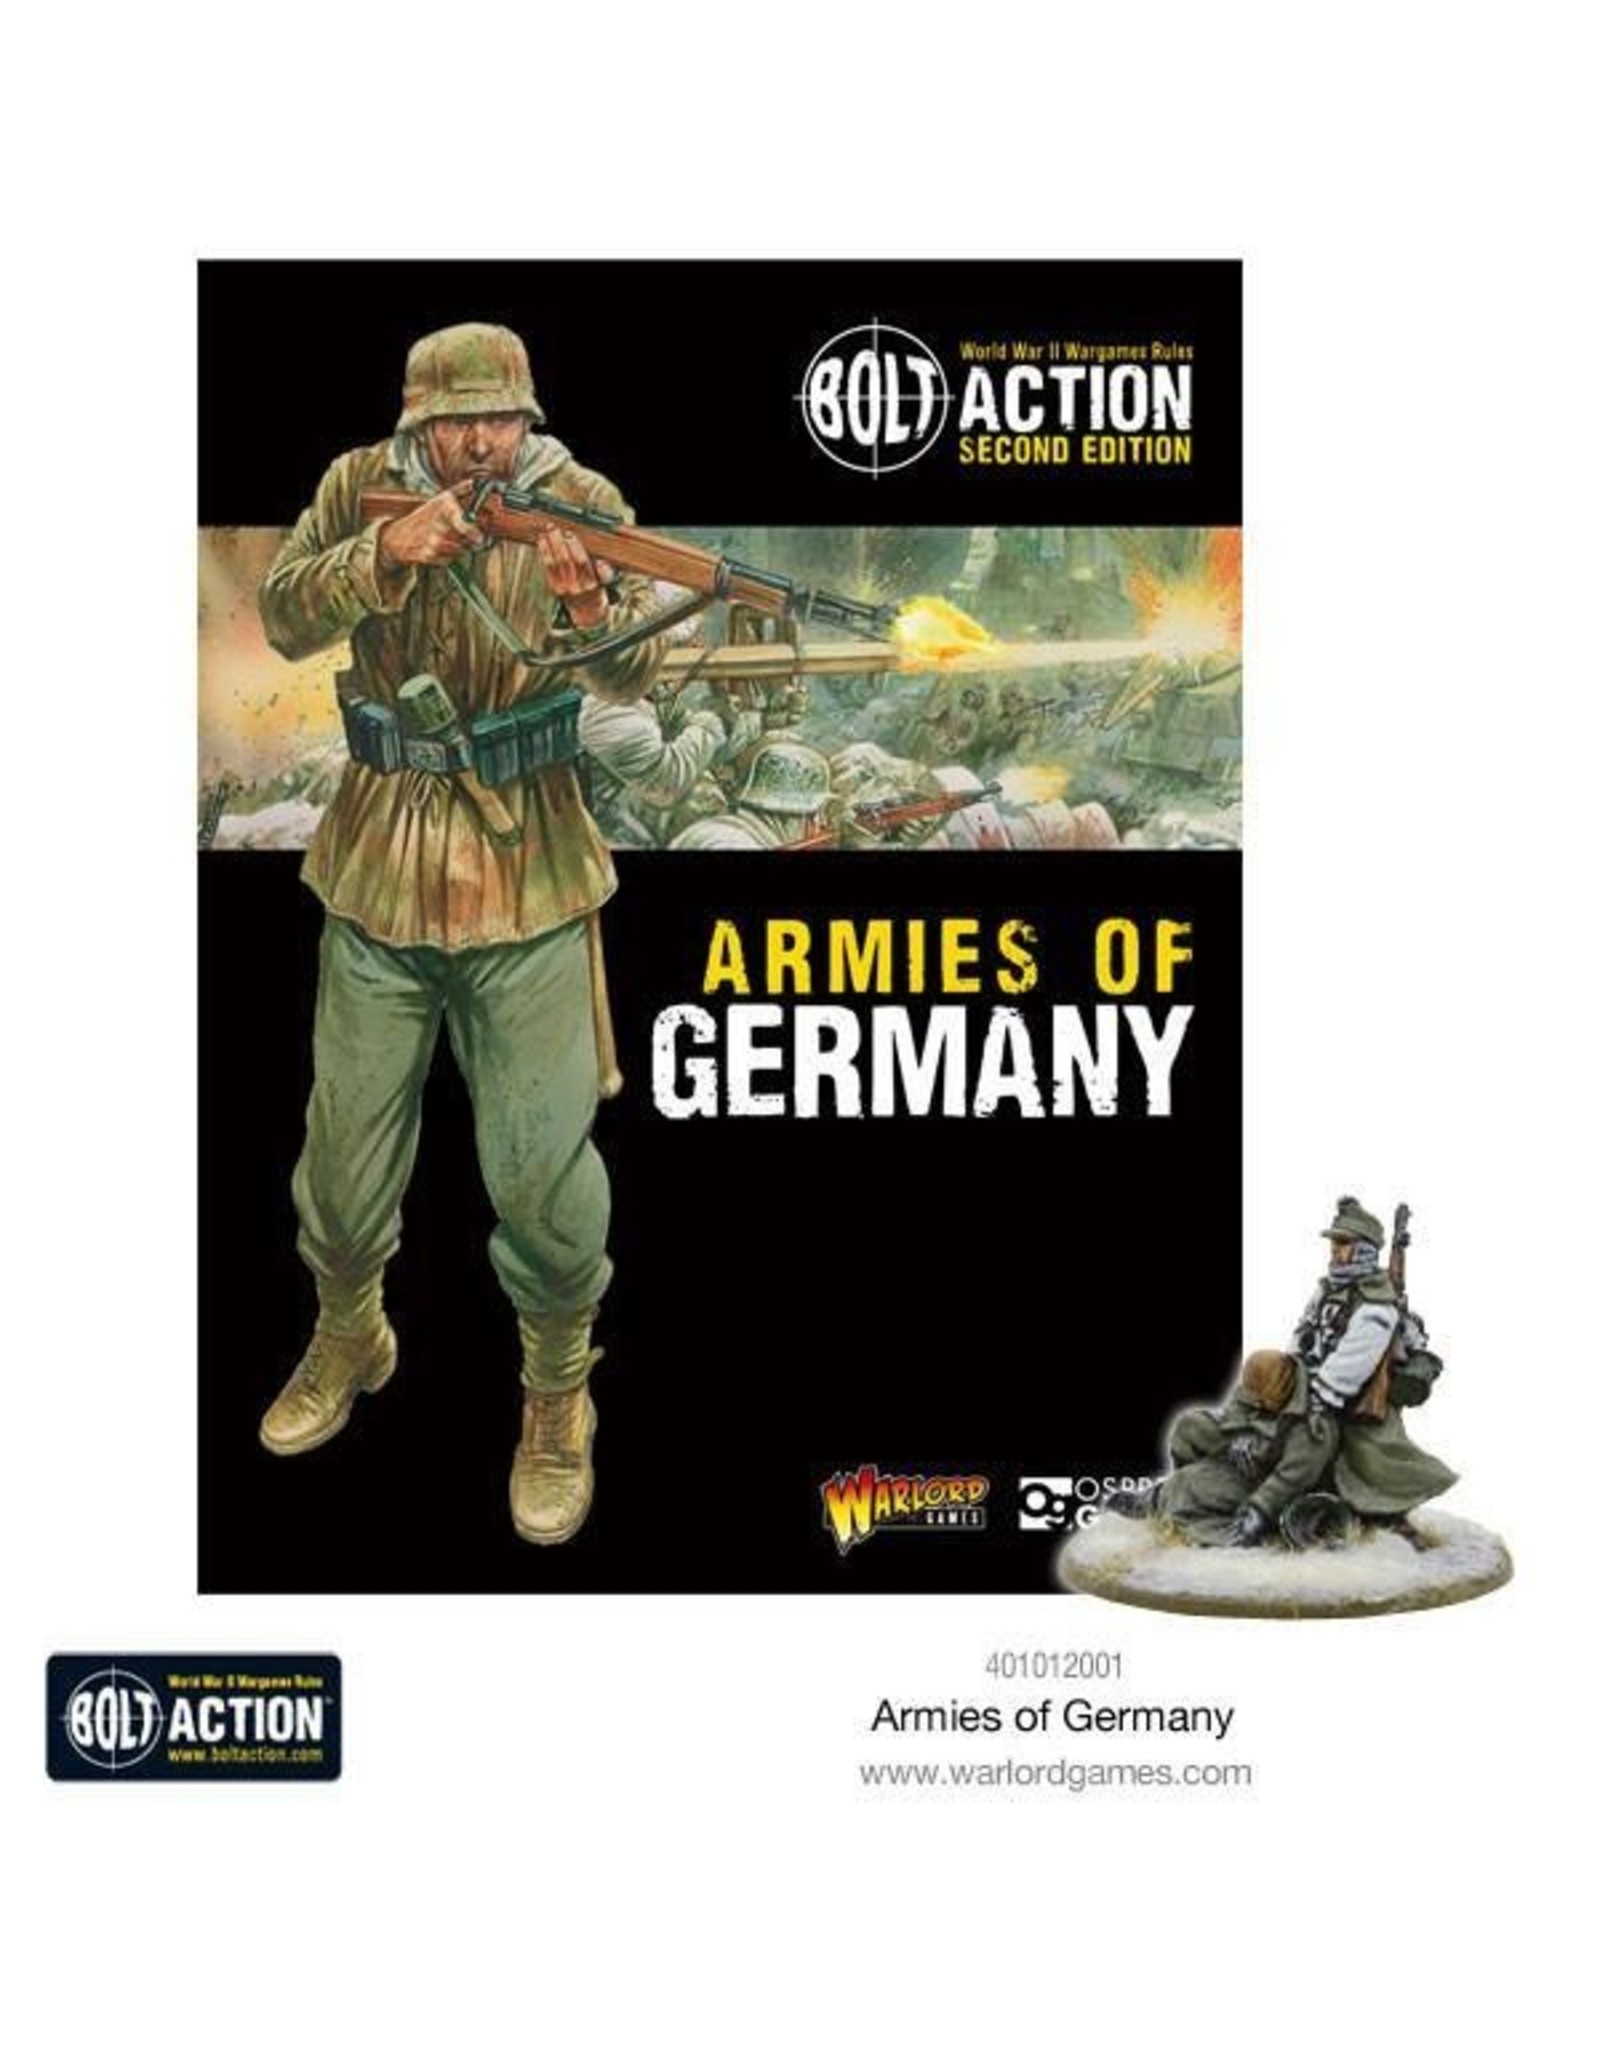 *Armies of Germany 2nd Edition